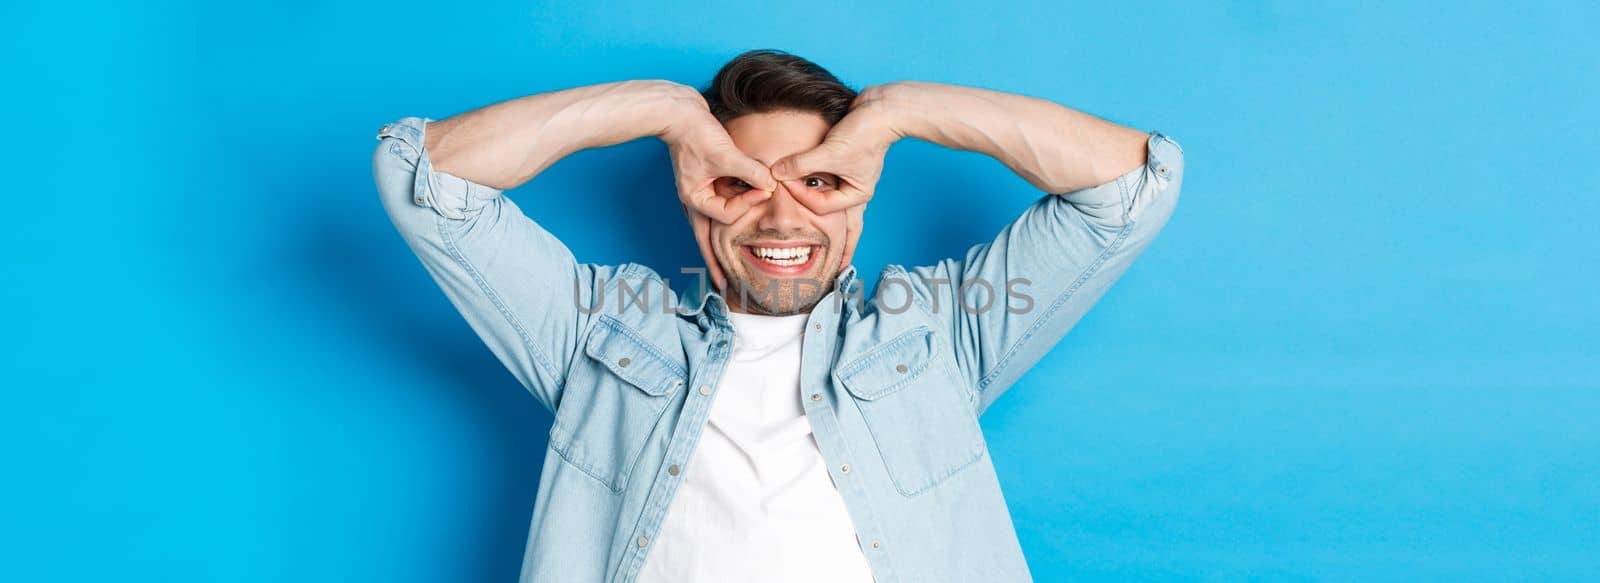 Young caucasian guy showing funny expression, making superhero mask with fingers on eyes, smiling happy, standing over blue background.